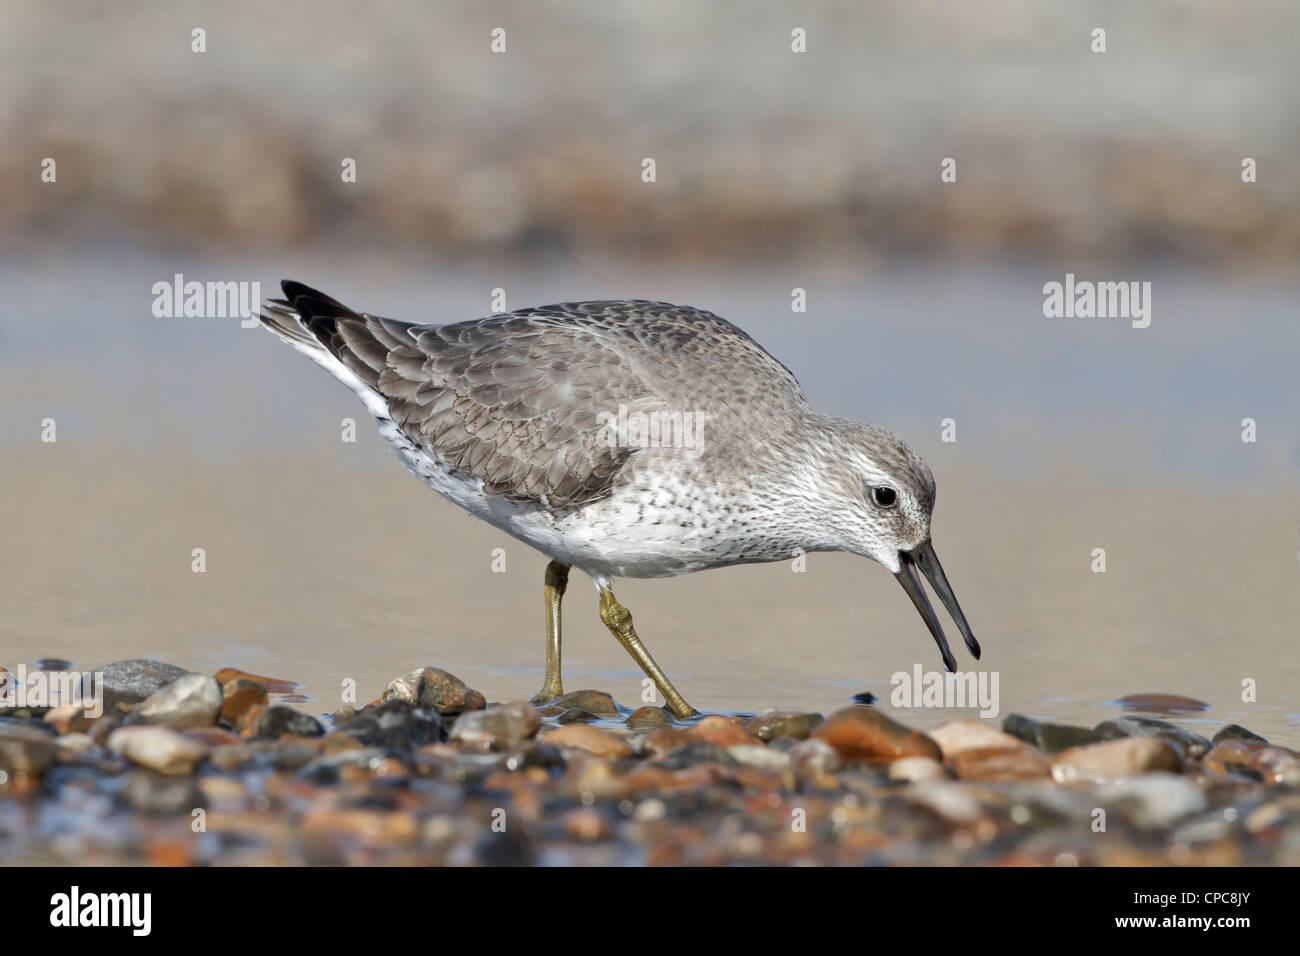 Winter plumage Knot/ Red Knot aggressive posture Stock Photo